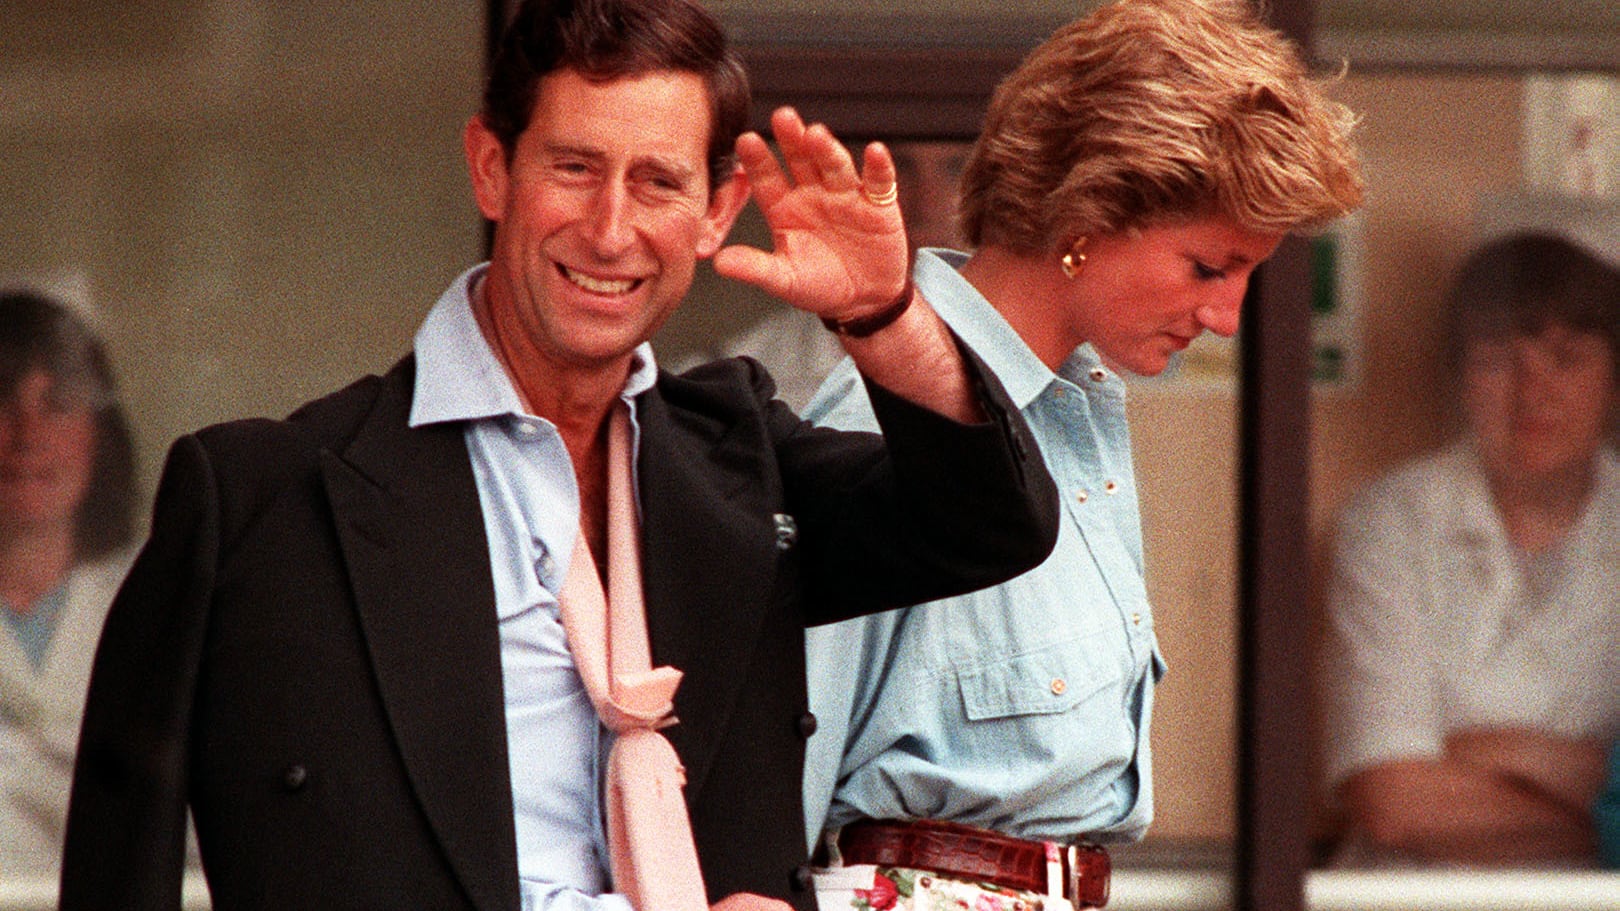 The Prince and Princess of Wales leaving Cirencester Hospital after Charles broke his arm in 1990